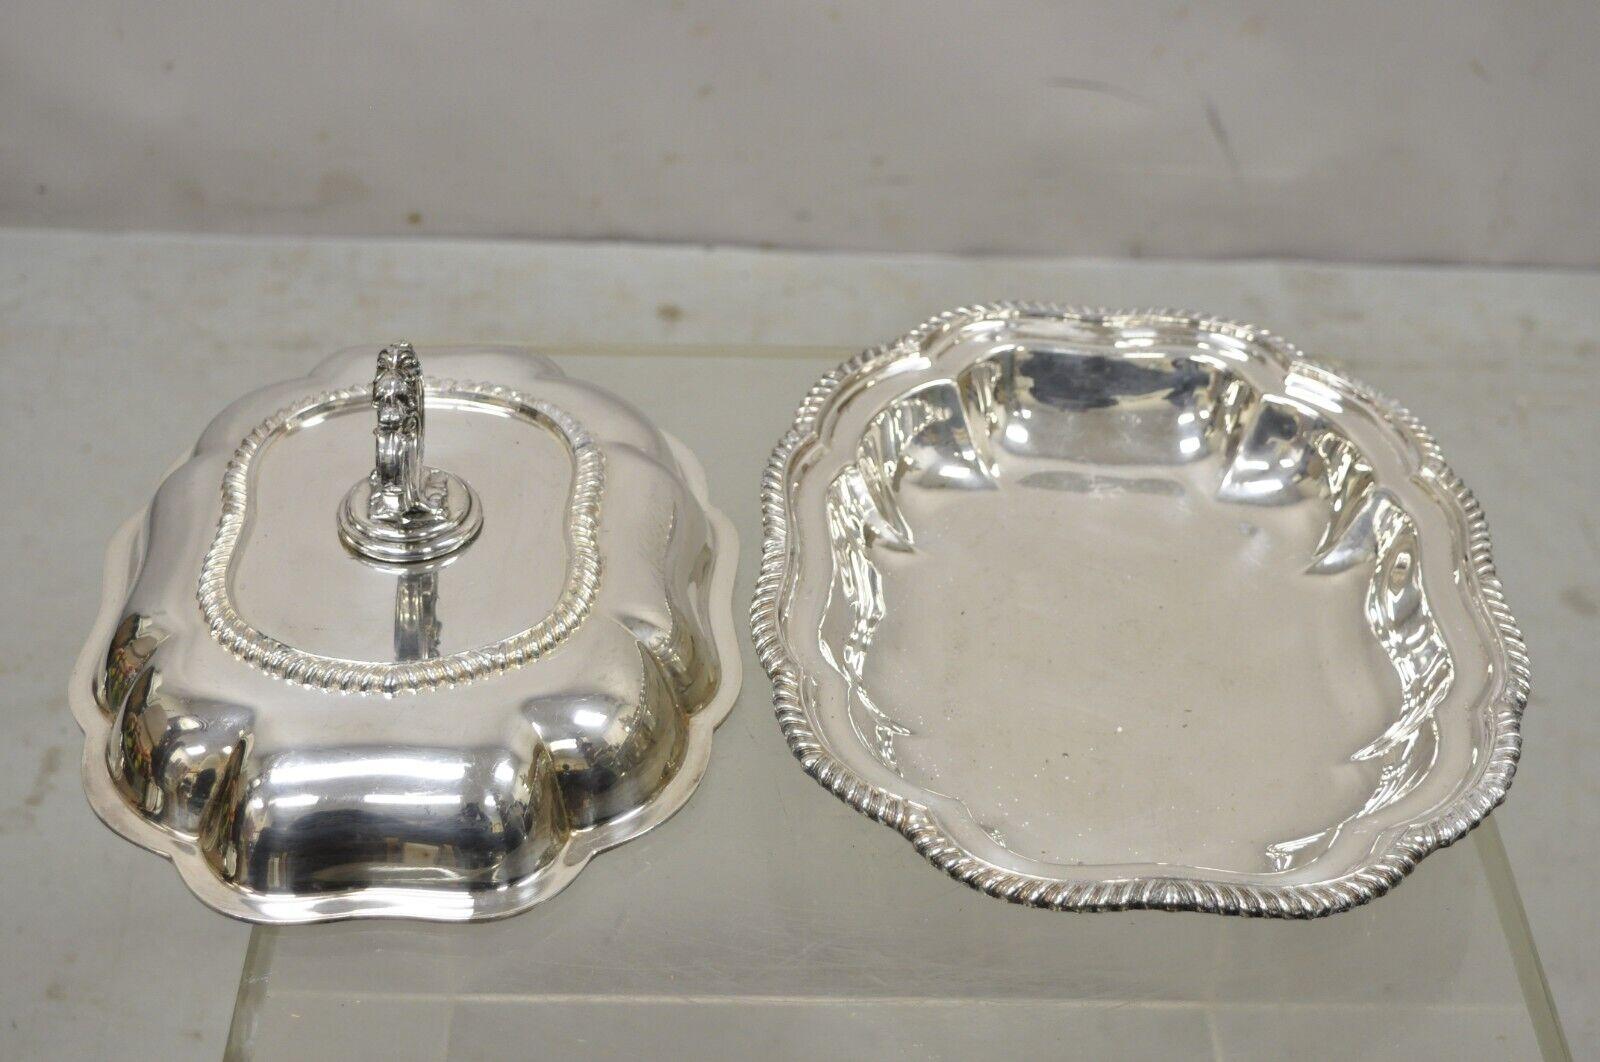 Vintage Regency Style Silver Plated Covered Vegetable Dish Serving Platter In Good Condition For Sale In Philadelphia, PA